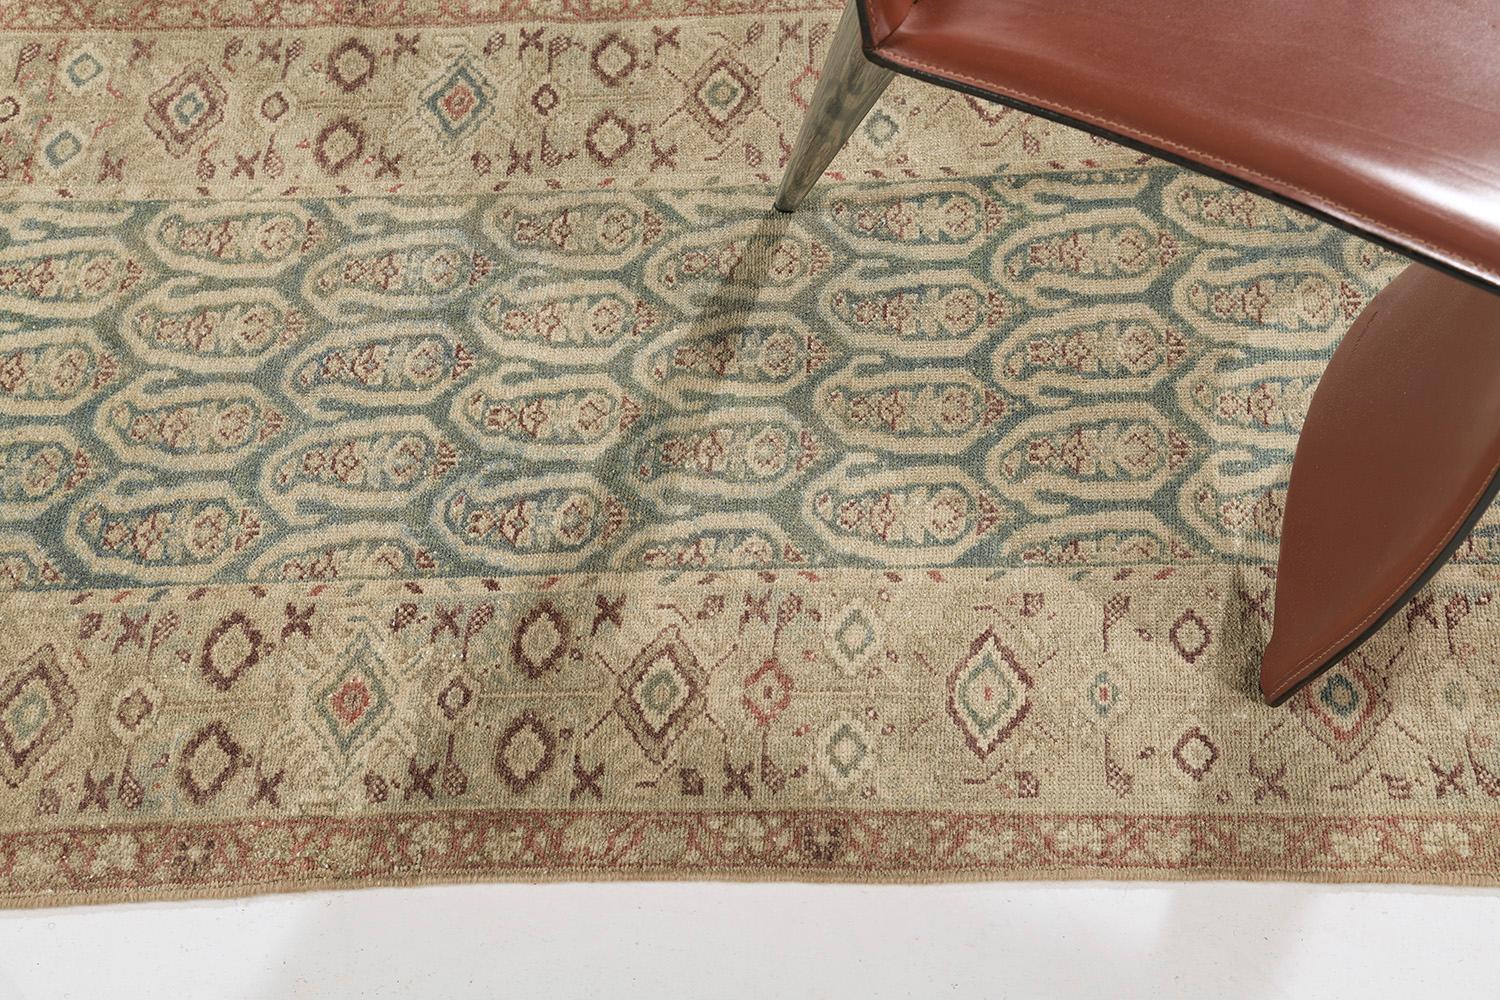 A remarkable hand-spun wool Persian Malayer Runner has immensely flexed its Bote-styled pattern along the perimeter of emblems and symbols in the teal ground. It is surrounded by different kinds of symbolic imprints in brown and gold elements. The